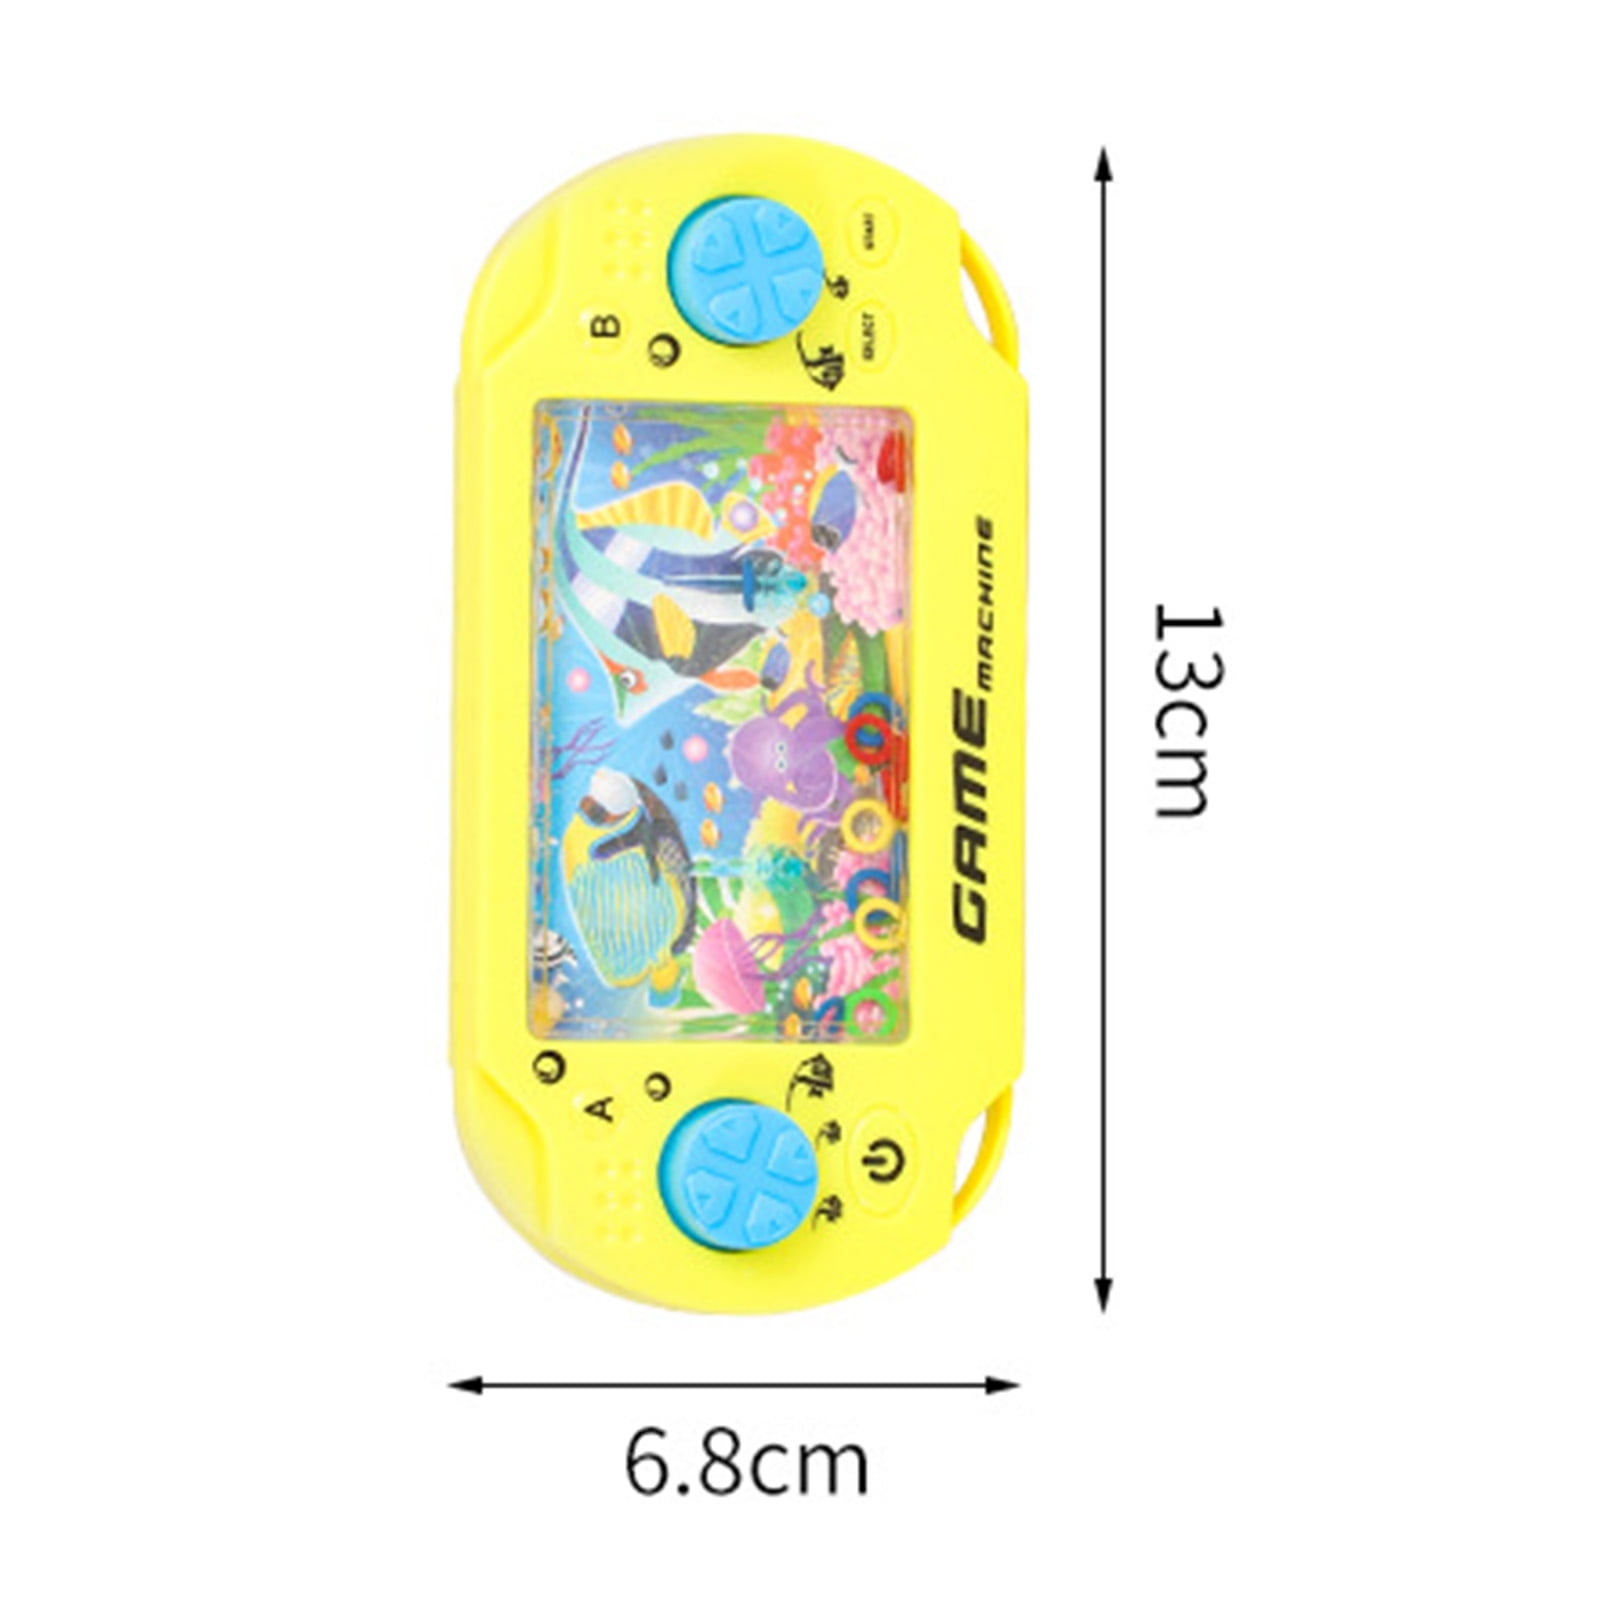 Classic Water Ring Game Machine Childrens Educational Recreation Water Ring  Toy Game Machine Educational Toys P148 From Angela918, $1.01 | DHgate.Com